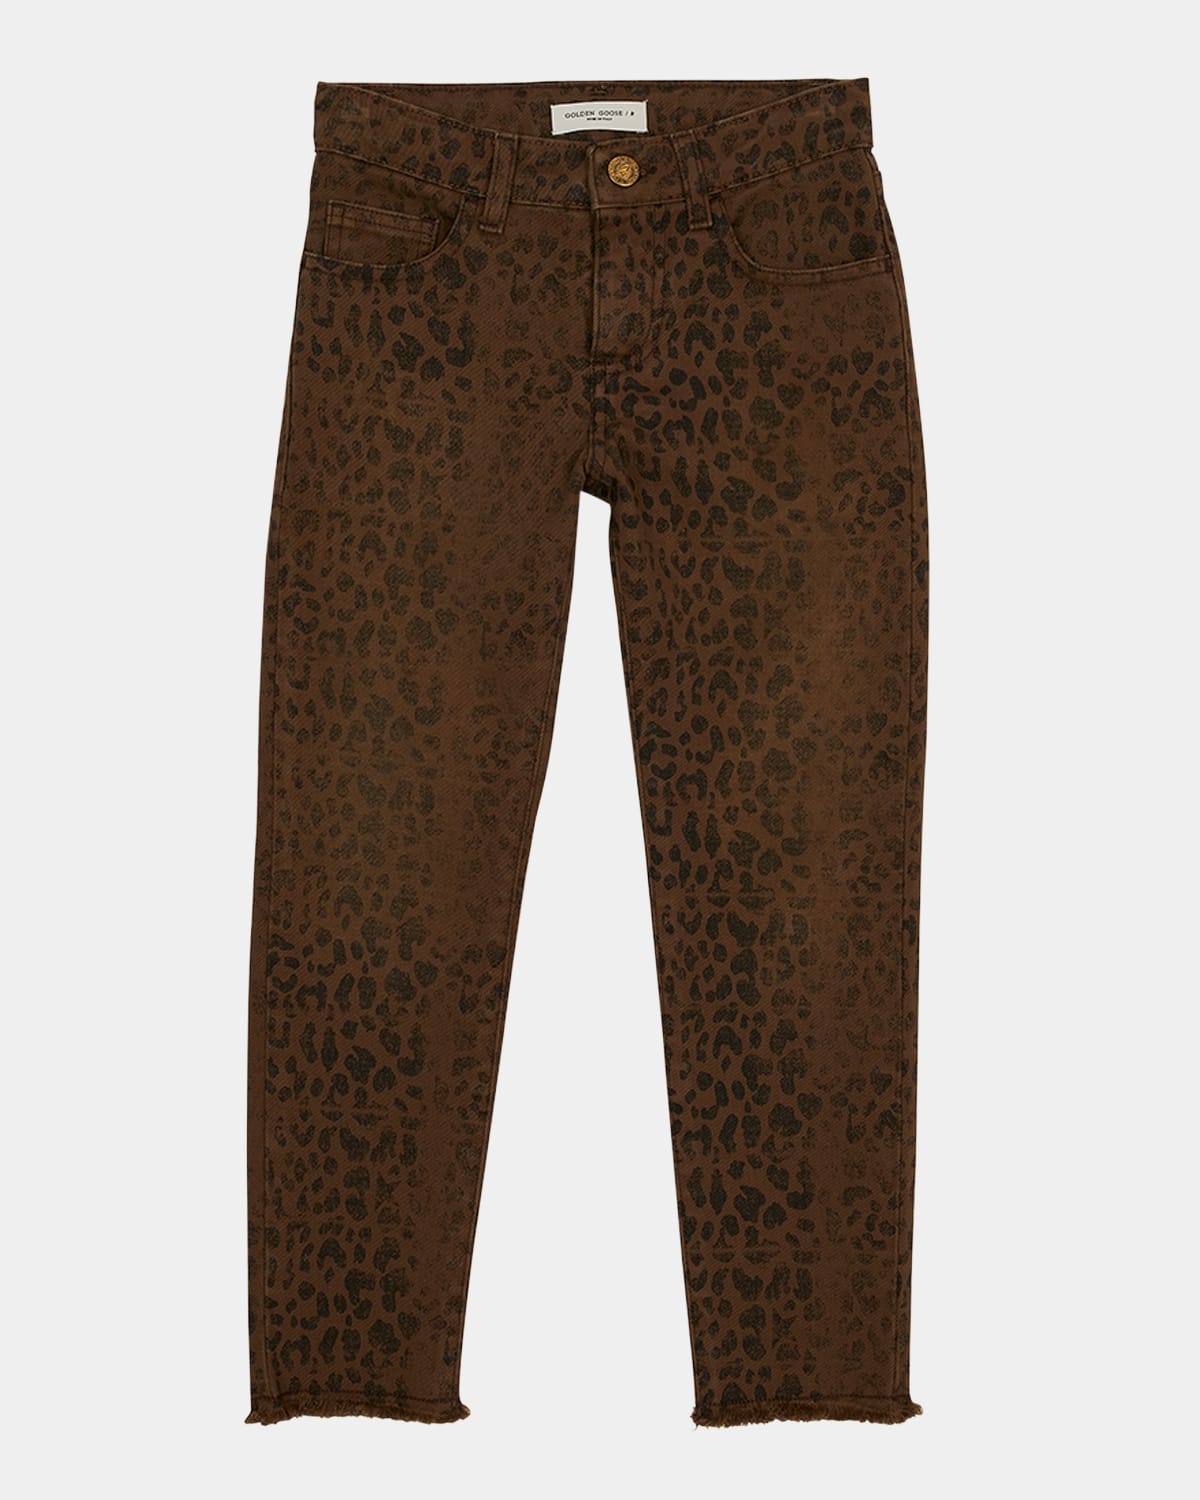 Girl's Faded Leopard-Print Jeans, Size 12